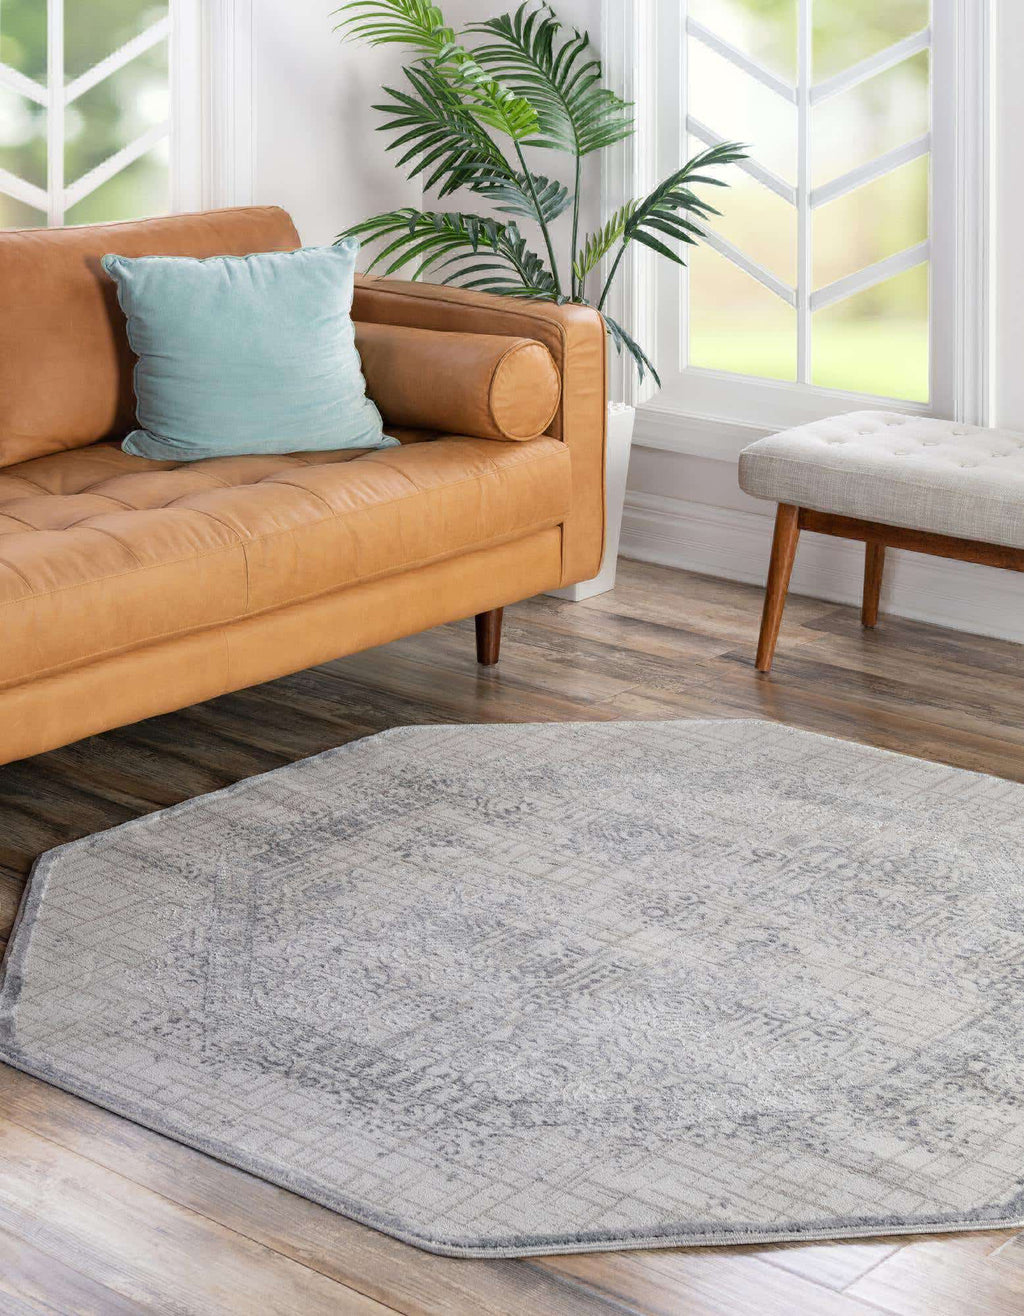 Unique Loom Aberdeen T-CHFD2 Gray Area Rug Octagon Lifestyle Image Feature